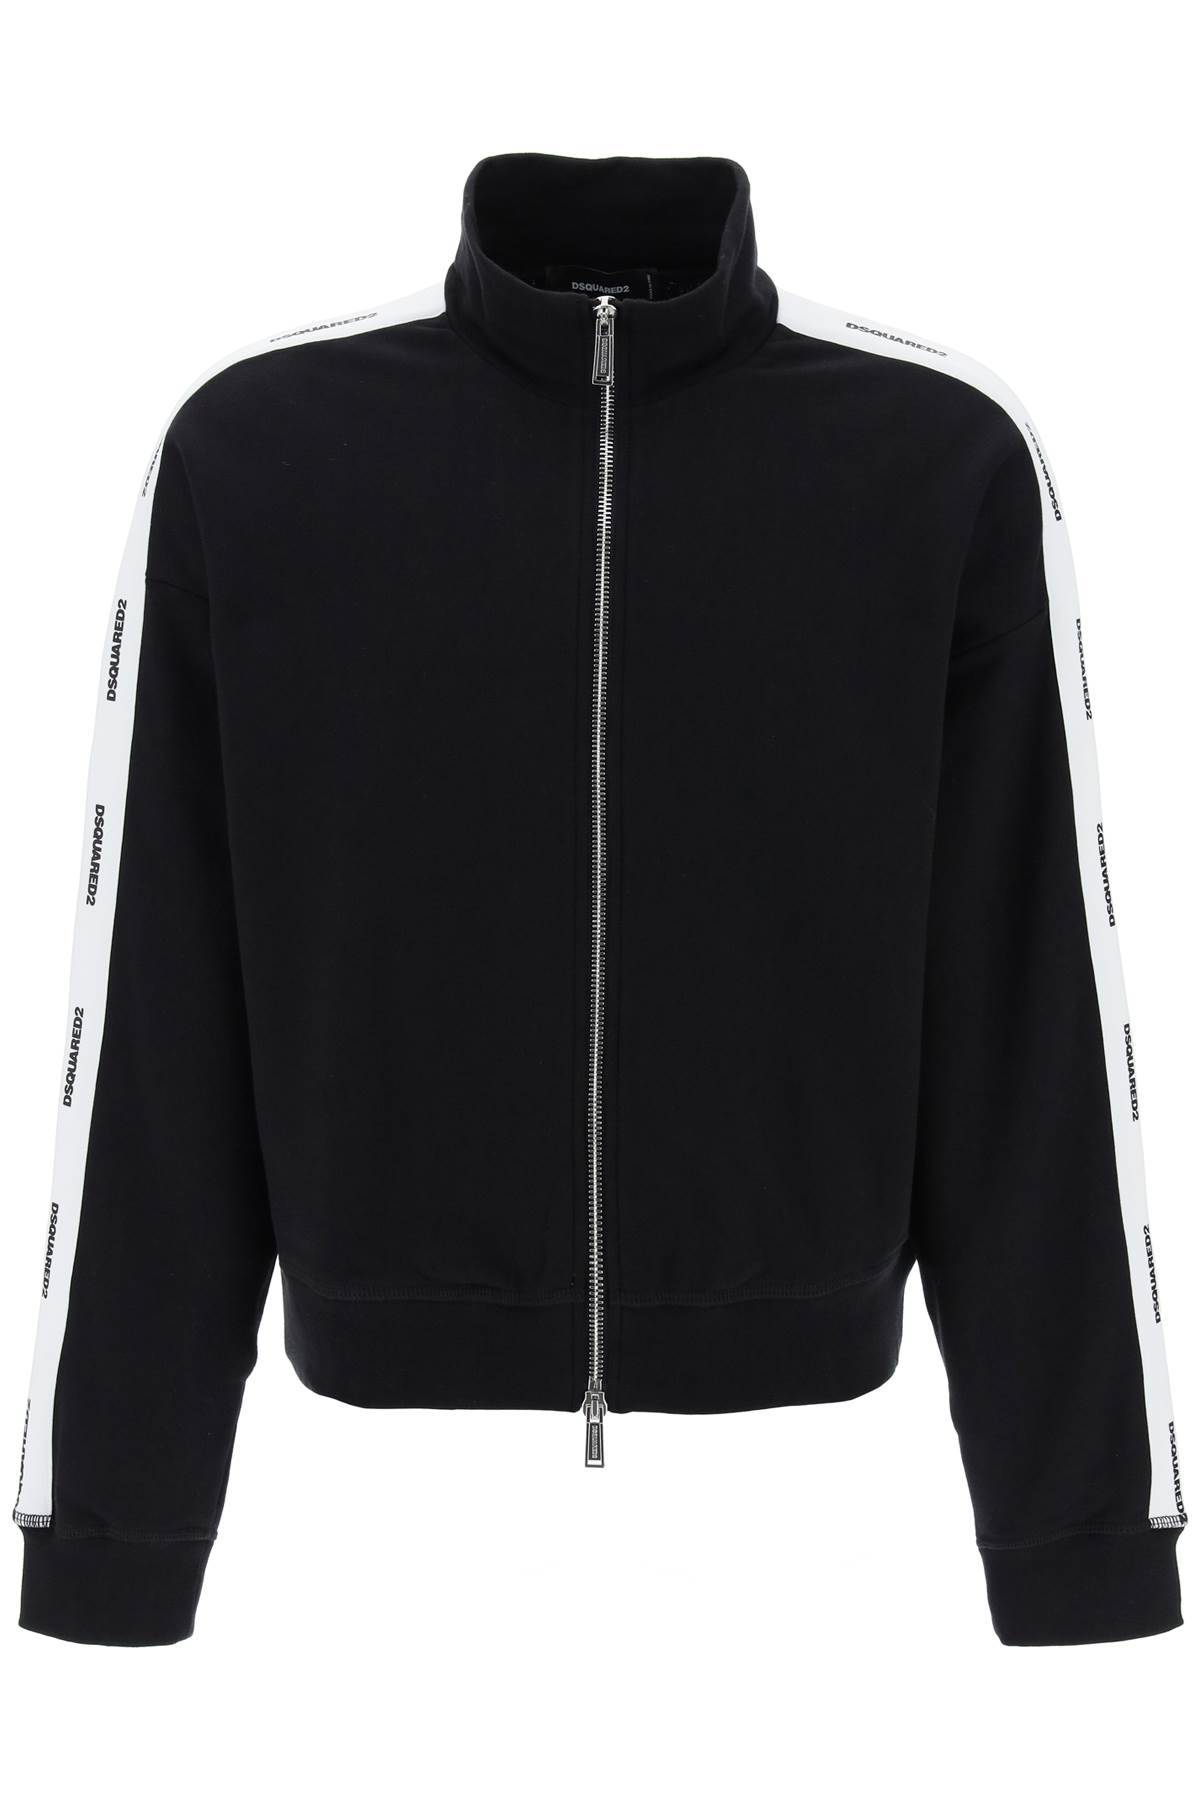 Dsquared2 DSQUARED2 zip-up sweatshirt with logo bands